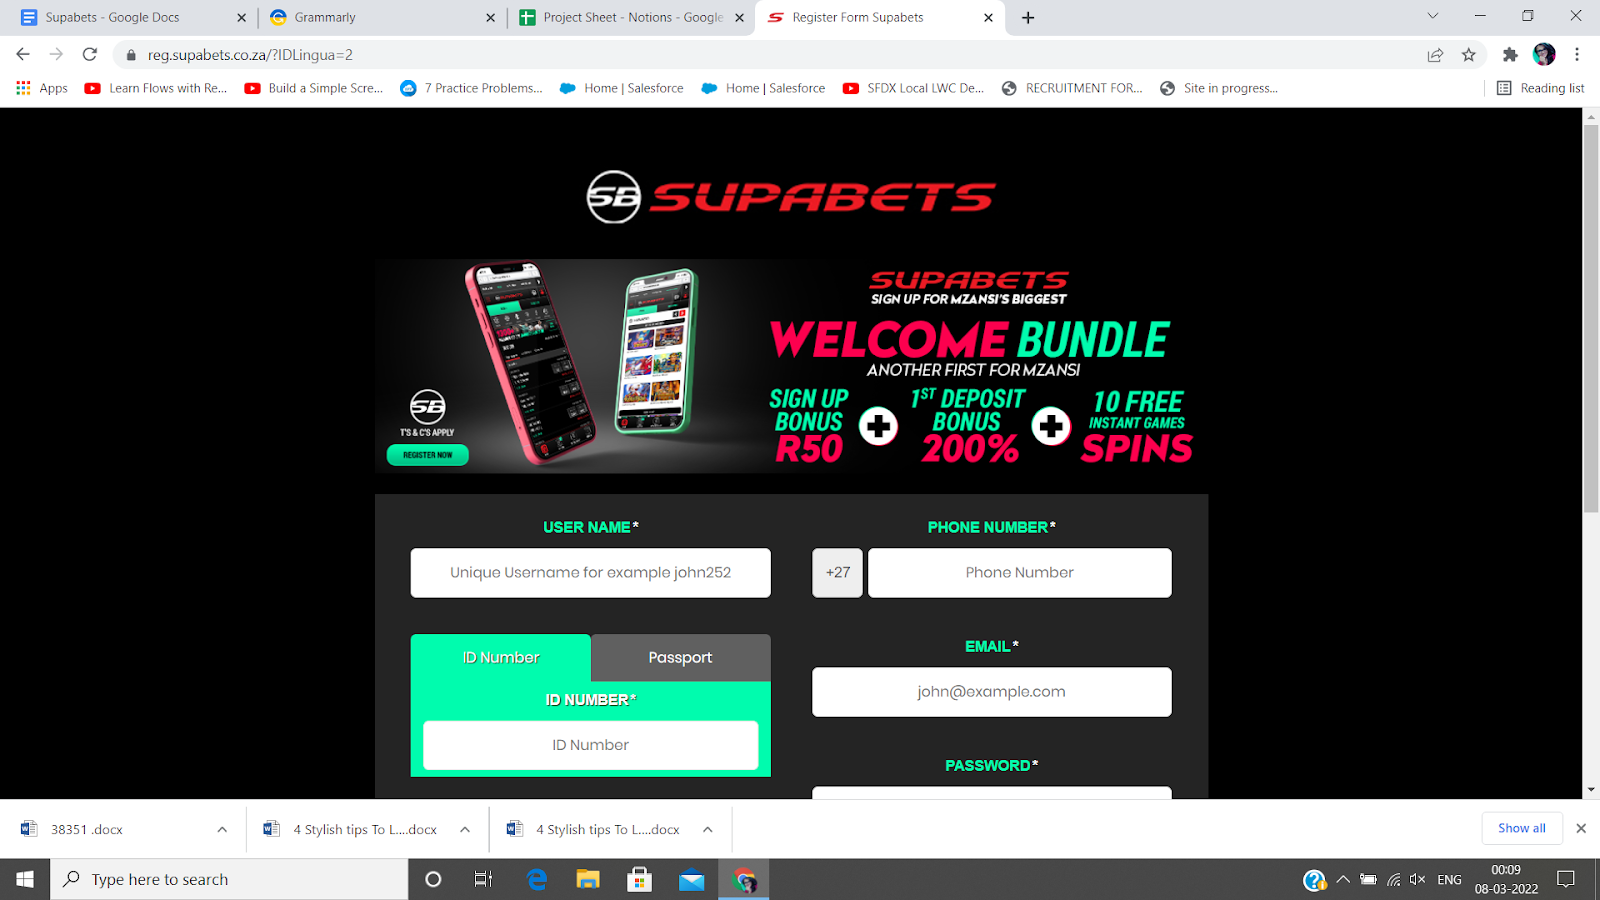 Welcome bonus offered by Supabets site.